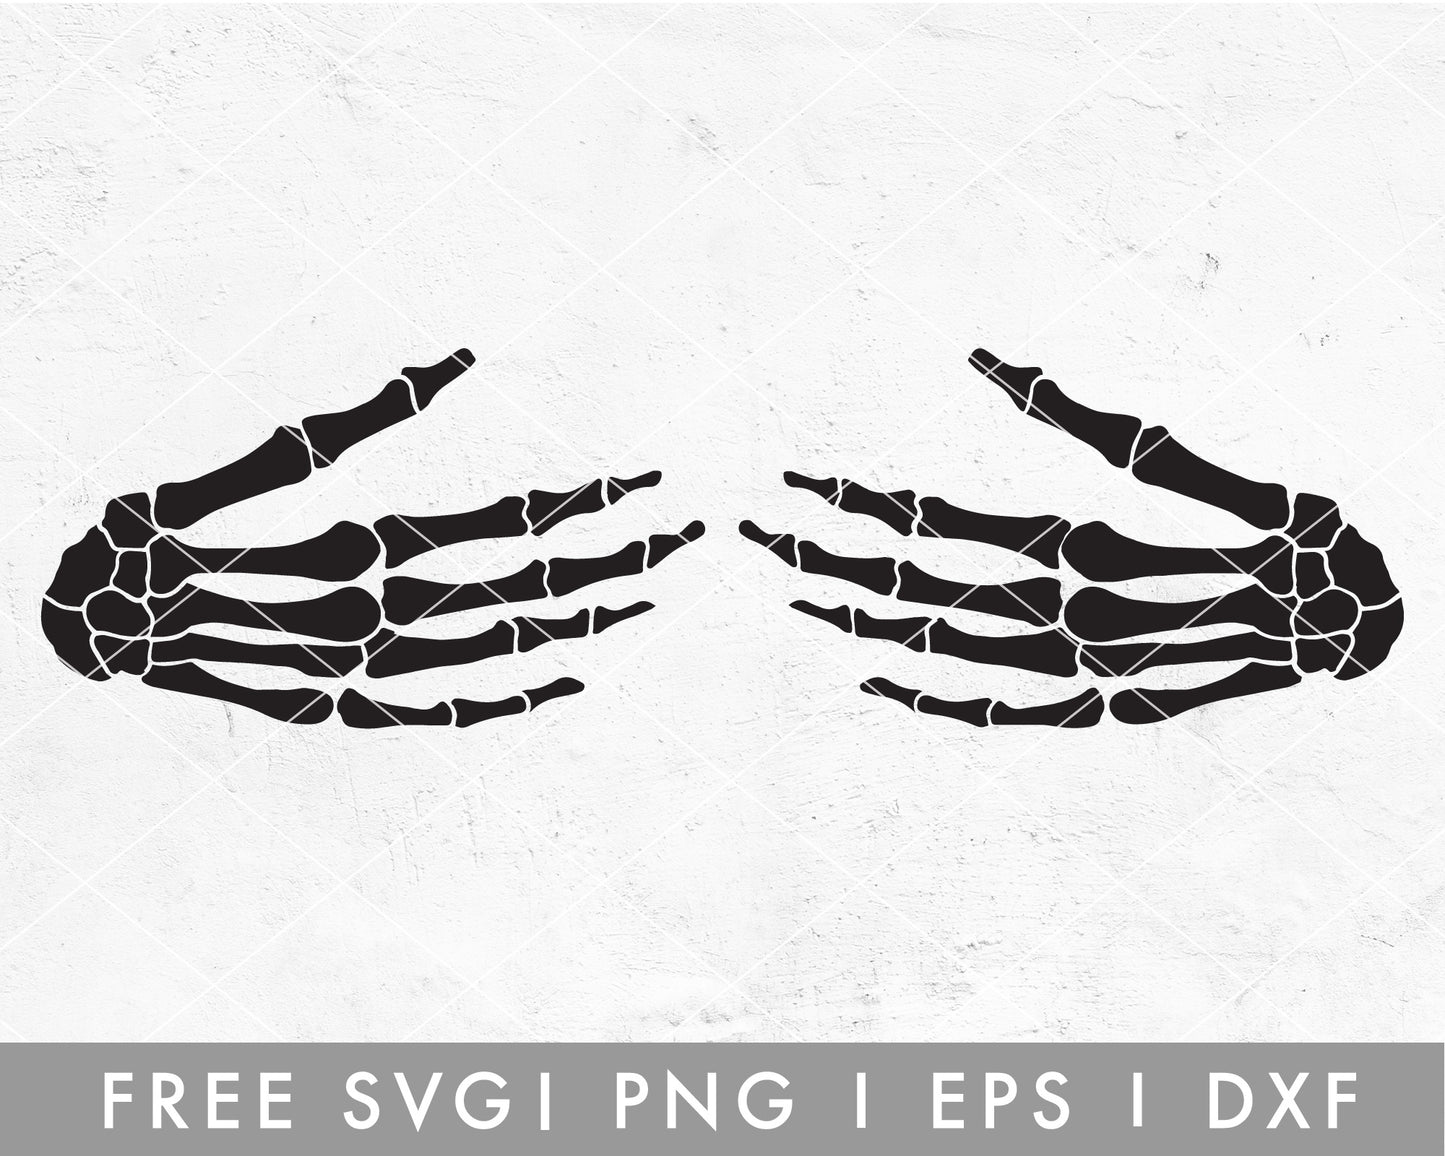 FREE Hugging Skeleton Hands SVG Cut File for Cricut, Cameo Silhouette 